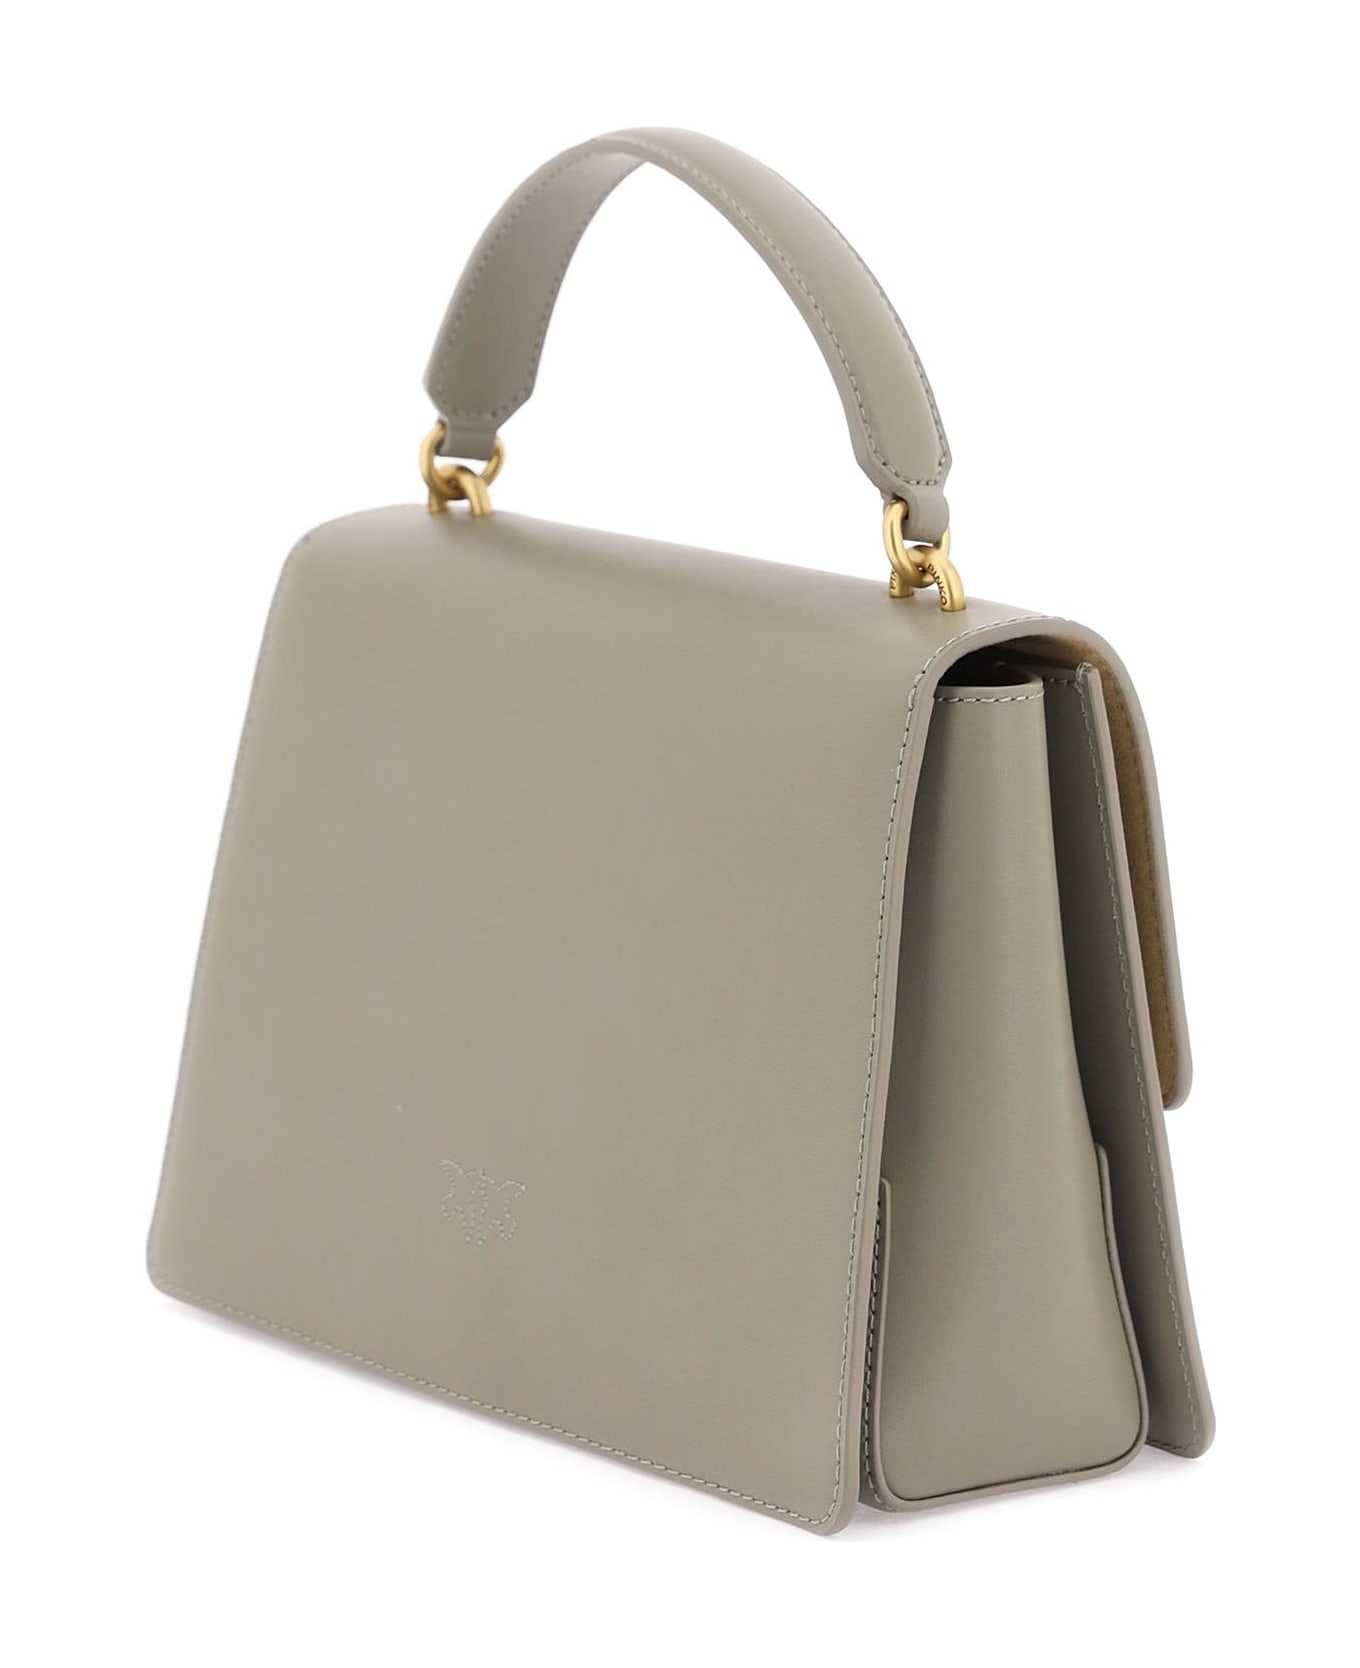 Pinko Love One Top Handle Classic Light Bag - NOCE ANTIQUE GOLD (Grey)